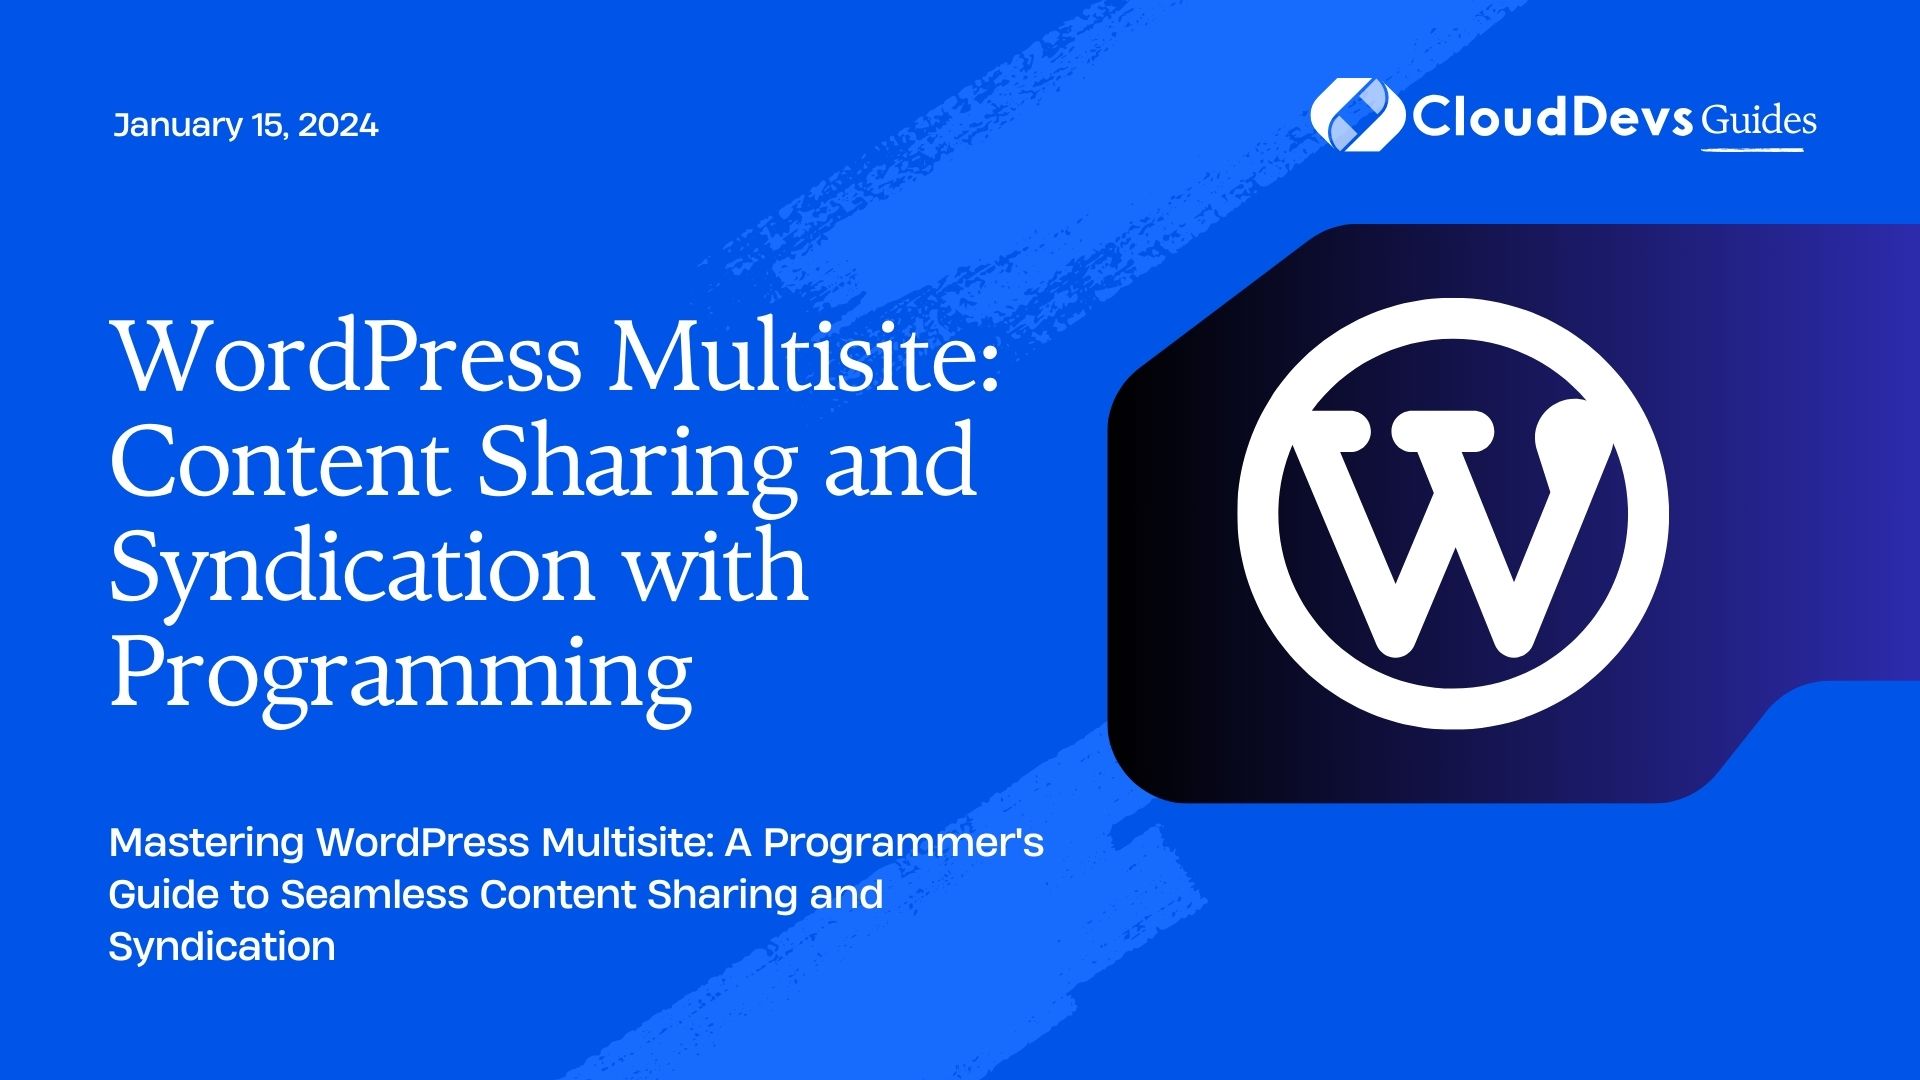 WordPress Multisite: Content Sharing and Syndication with Programming